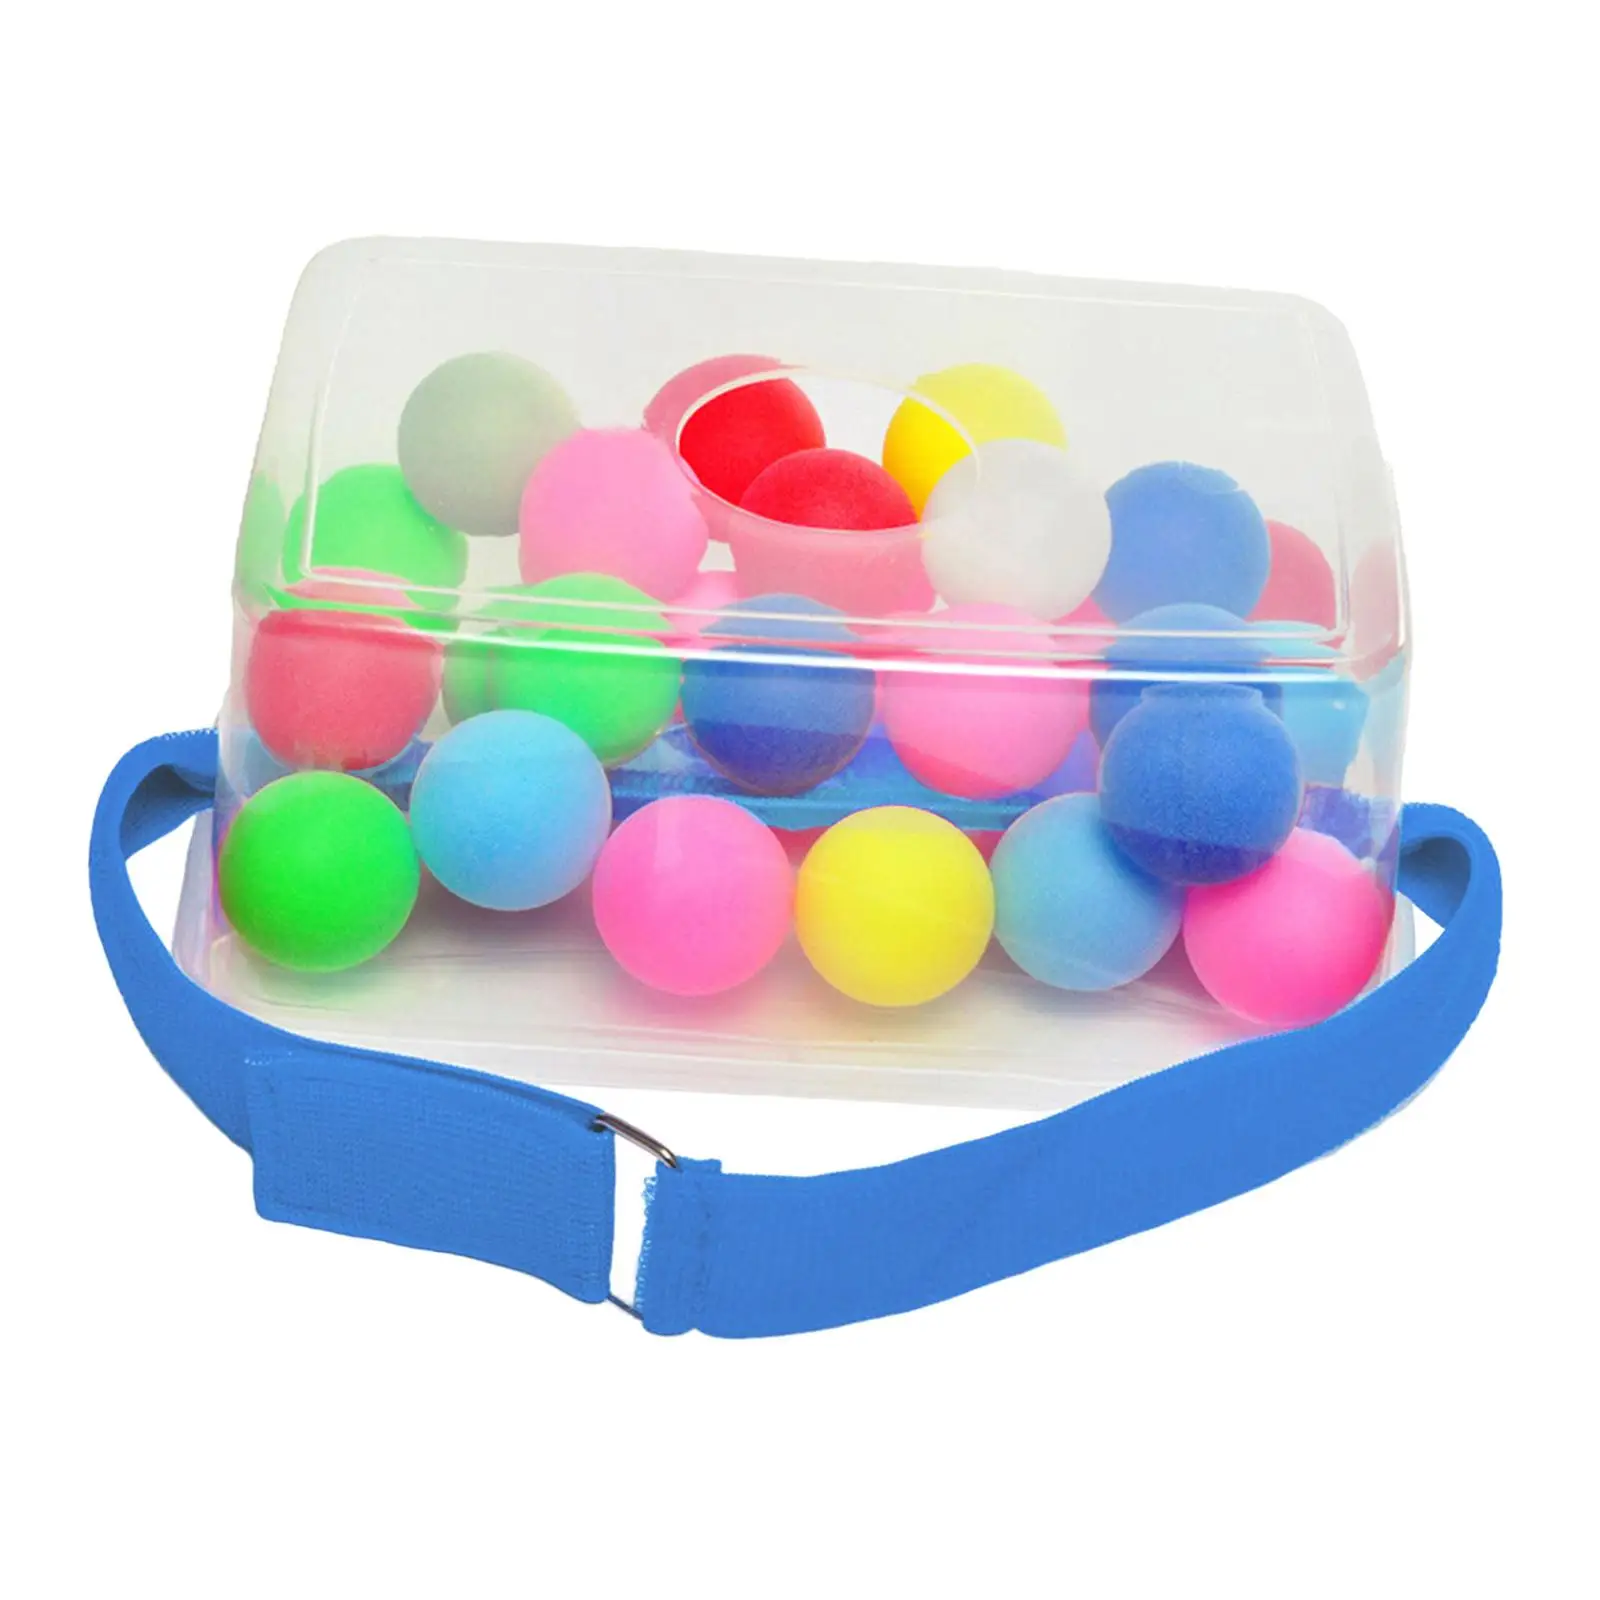 Swing Balls Game Toy Sports Activities Fun Family Game Set Party Games for Kids Adults for Games Beach Party Playset Easter Yard